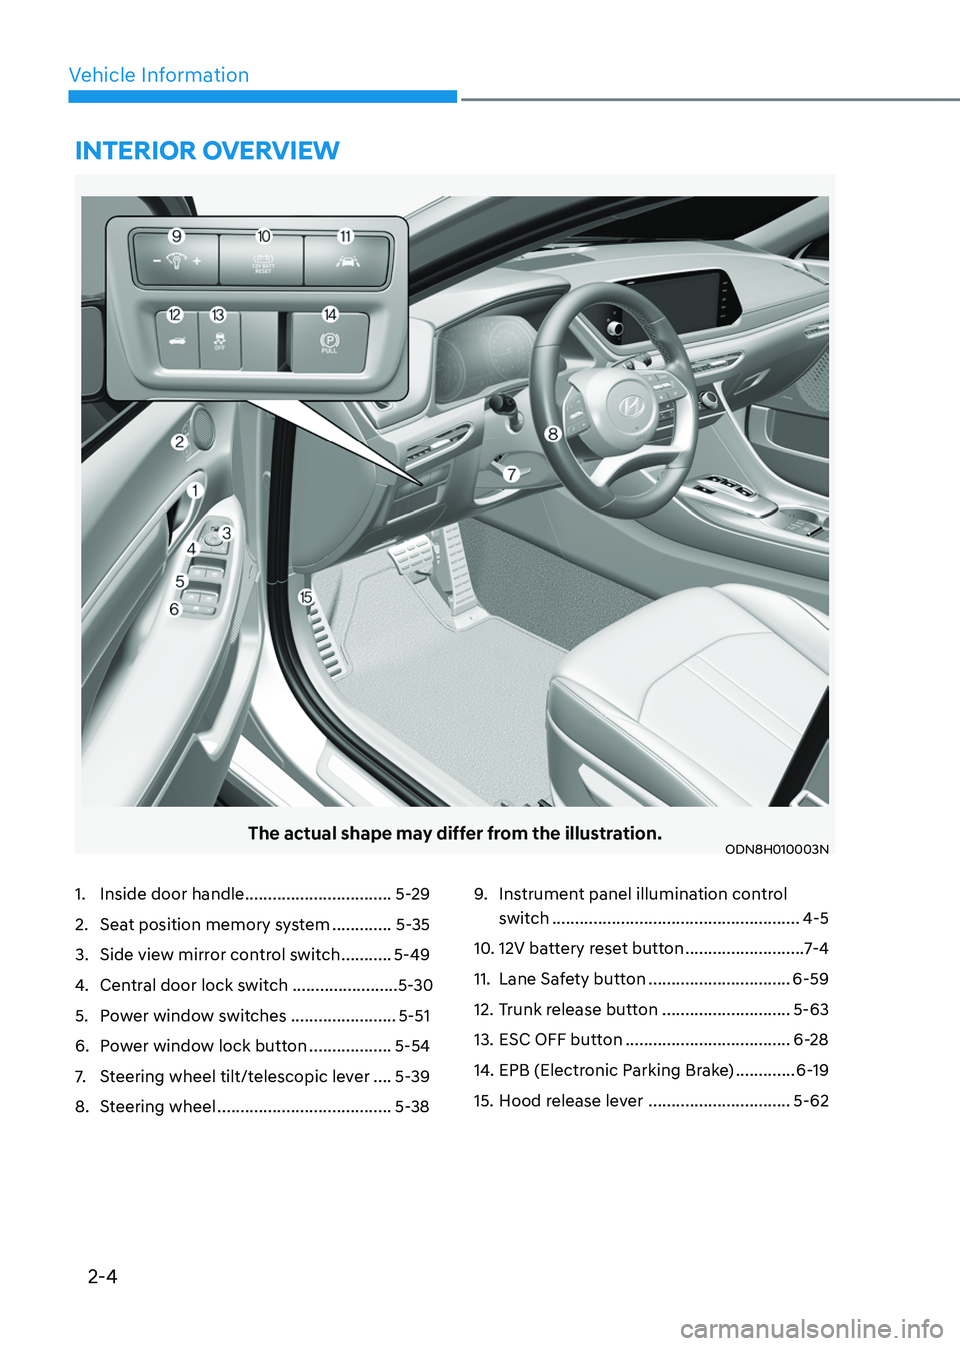 HYUNDAI SONATA HYBRID 2021  Owners Manual 2-4
Vehicle Information
The actual shape may differ from the illustration.ODN8H010003N
1. Inside door handle ................................5-29
2. Seat position memory system .............5-35
3. Si